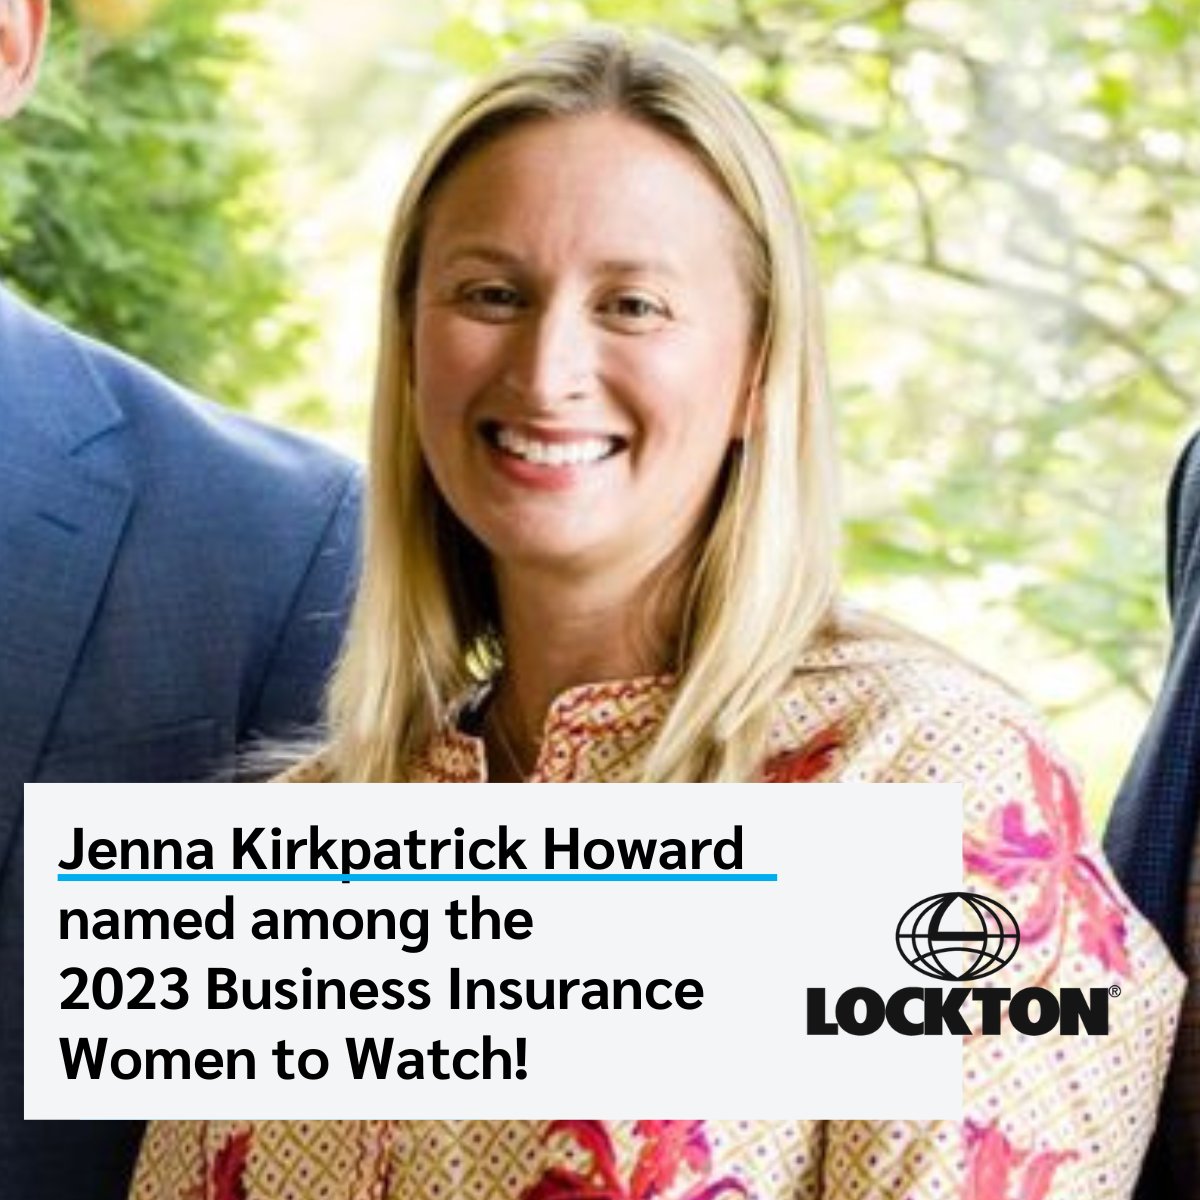 Congratulations to Jenna Howard for being named among the 2023 Business Insurance Women to Watch! As a leader within Lockton, the insurance industry and her community, she is well-deserving of this award.